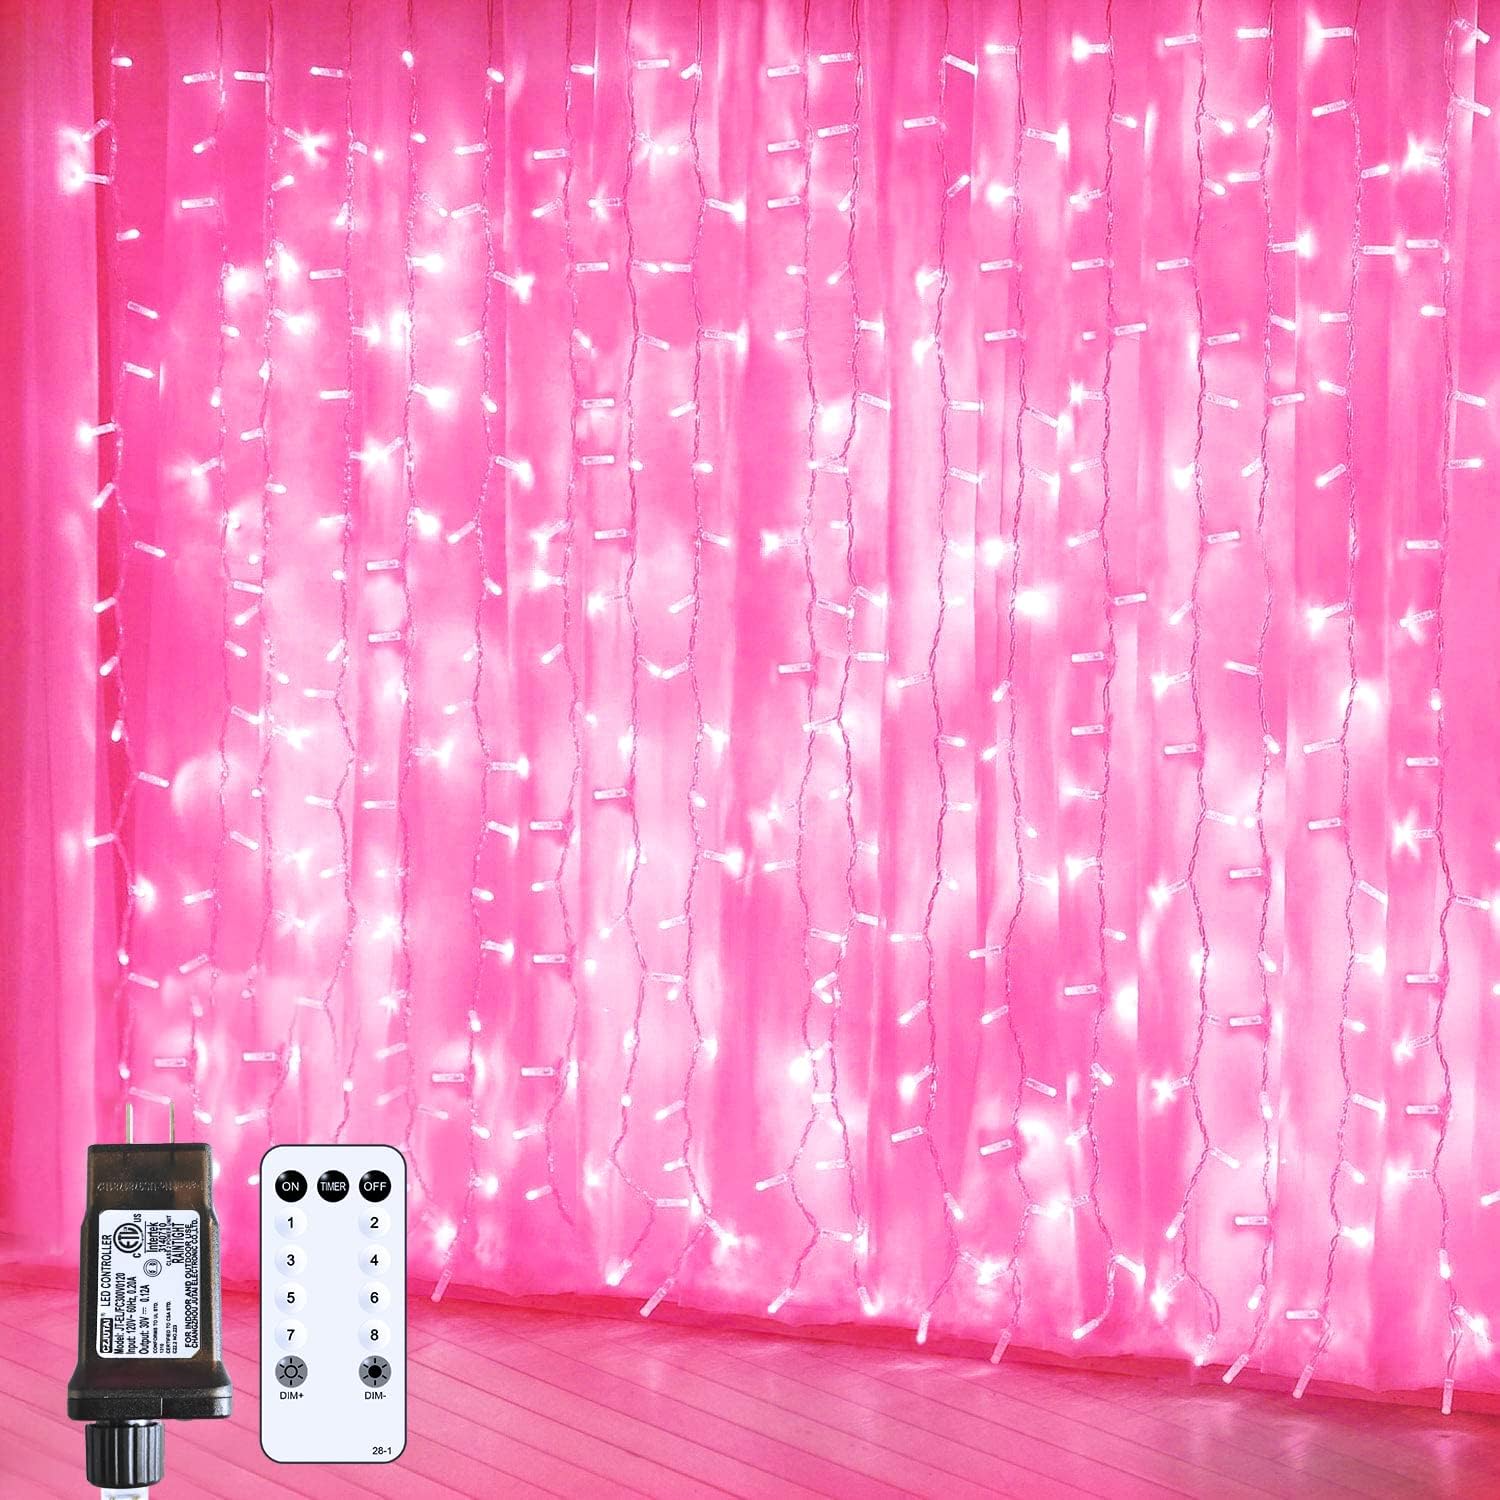 JMEXSUSS 300 LED Remote Control Pink Curtain Lights, 8 Modes Pink Valentine Lights, Pink String Lights for Bedroom Window Wall Party Backdrop Valentine Decorations (9.8x9.8ft)